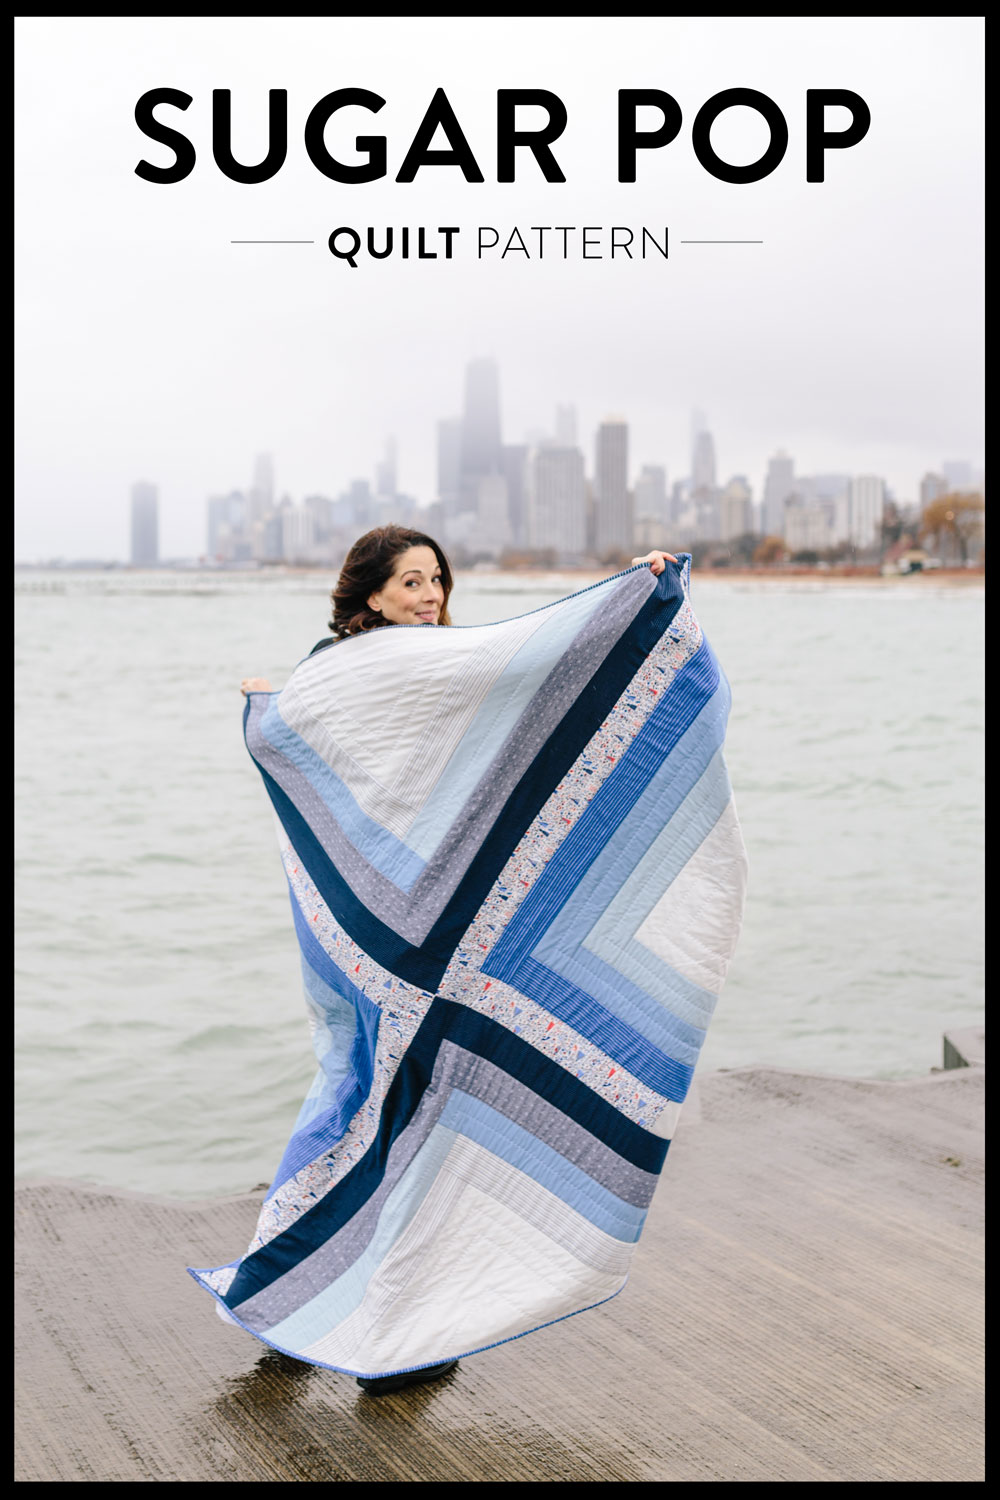 The Sugar POP quilt pattern is a PDF download that includes throw, baby and a pillow size. This modern design works well as a gradient or with fabric scraps. It's also perfect for hand quilting.